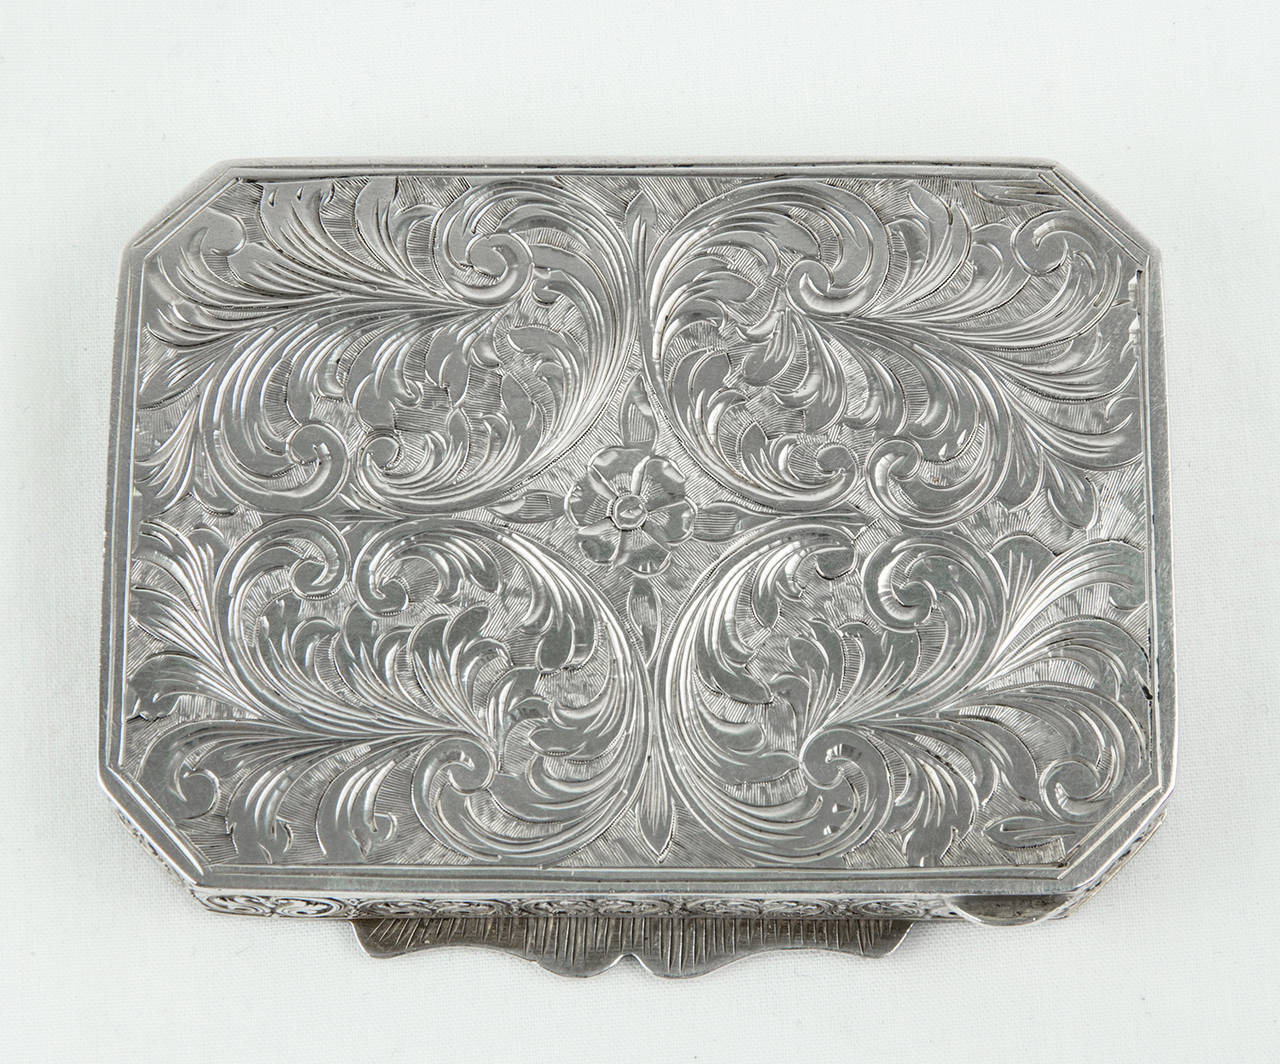 A fine antique rectangular silver and enamel compact box with canted corners, beautifully engraved all-over and with fine hand-painted enameling to the hinged lid. Overall engraving with stylized urns and foliate designs; the engraved lid